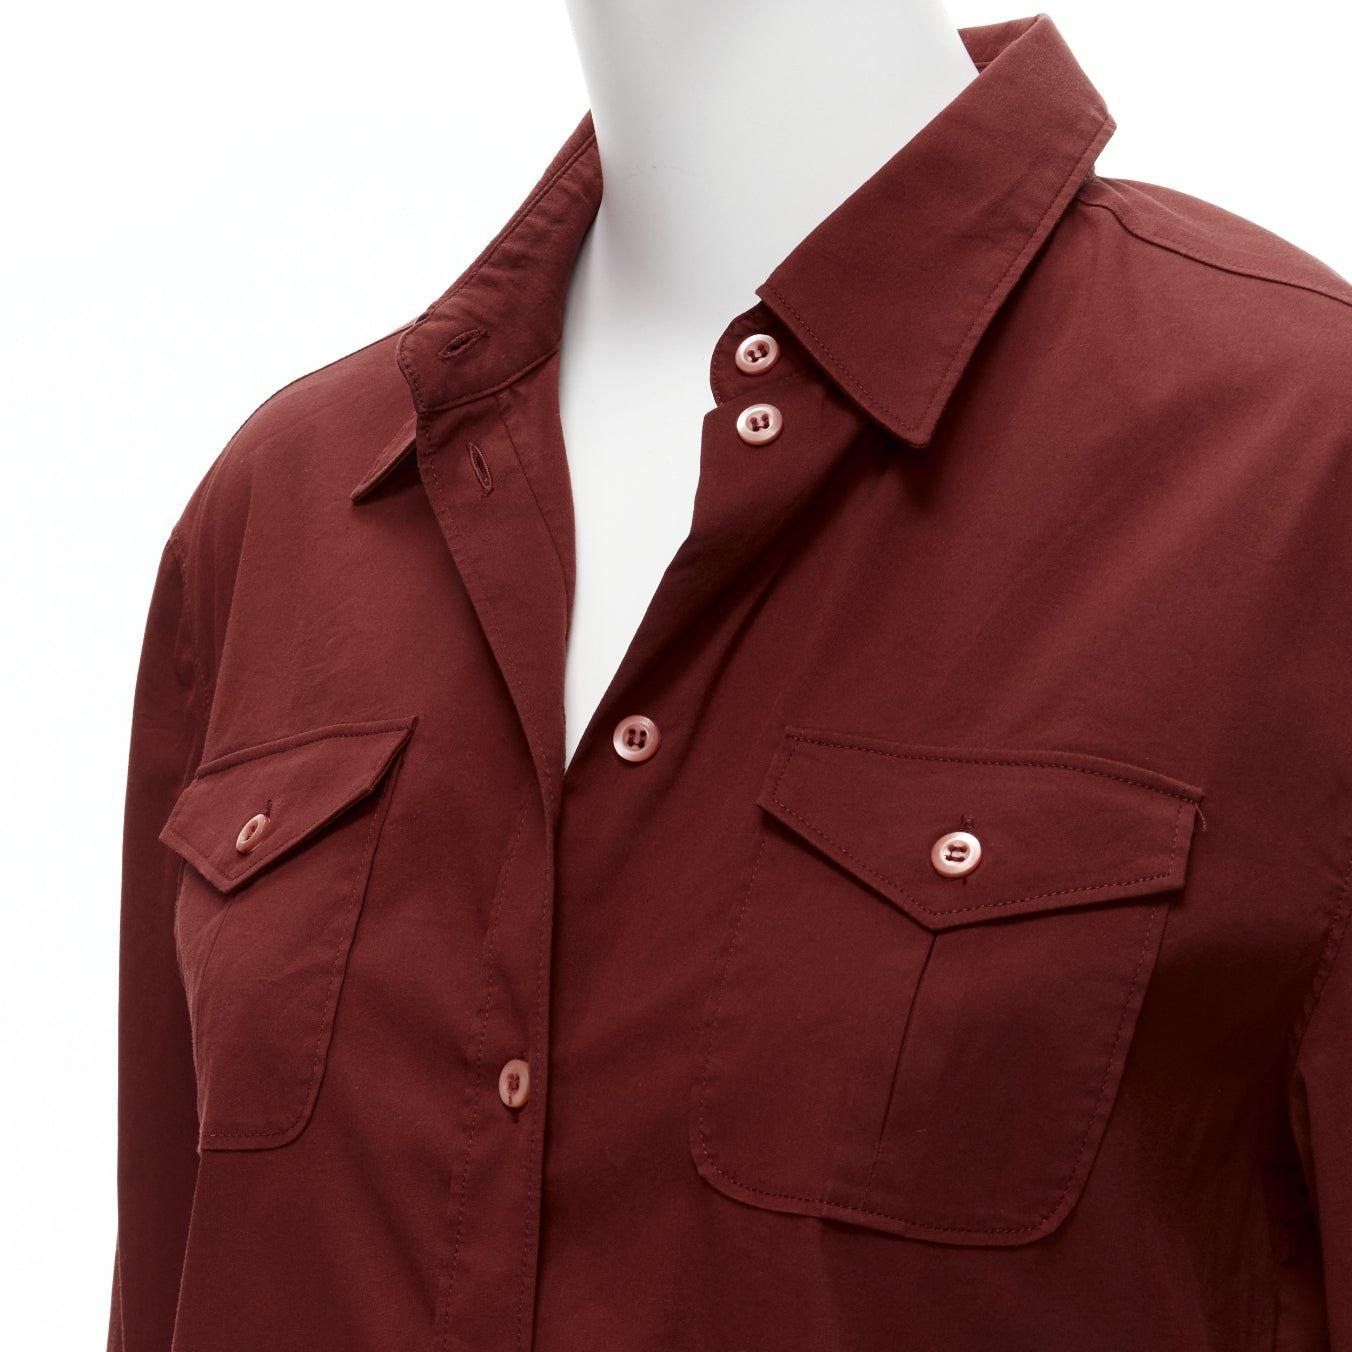 PRADA 1997 Vintage red double flap pocket button front dress shirt IT44 L
Reference: CNPG/A00029
Brand: Prada
Designer: Miuccia Prada
Collection: 1997
Material: Cotton, Nylon, Rubber
Color: Red
Pattern: Solid
Closure: Button
Made in: